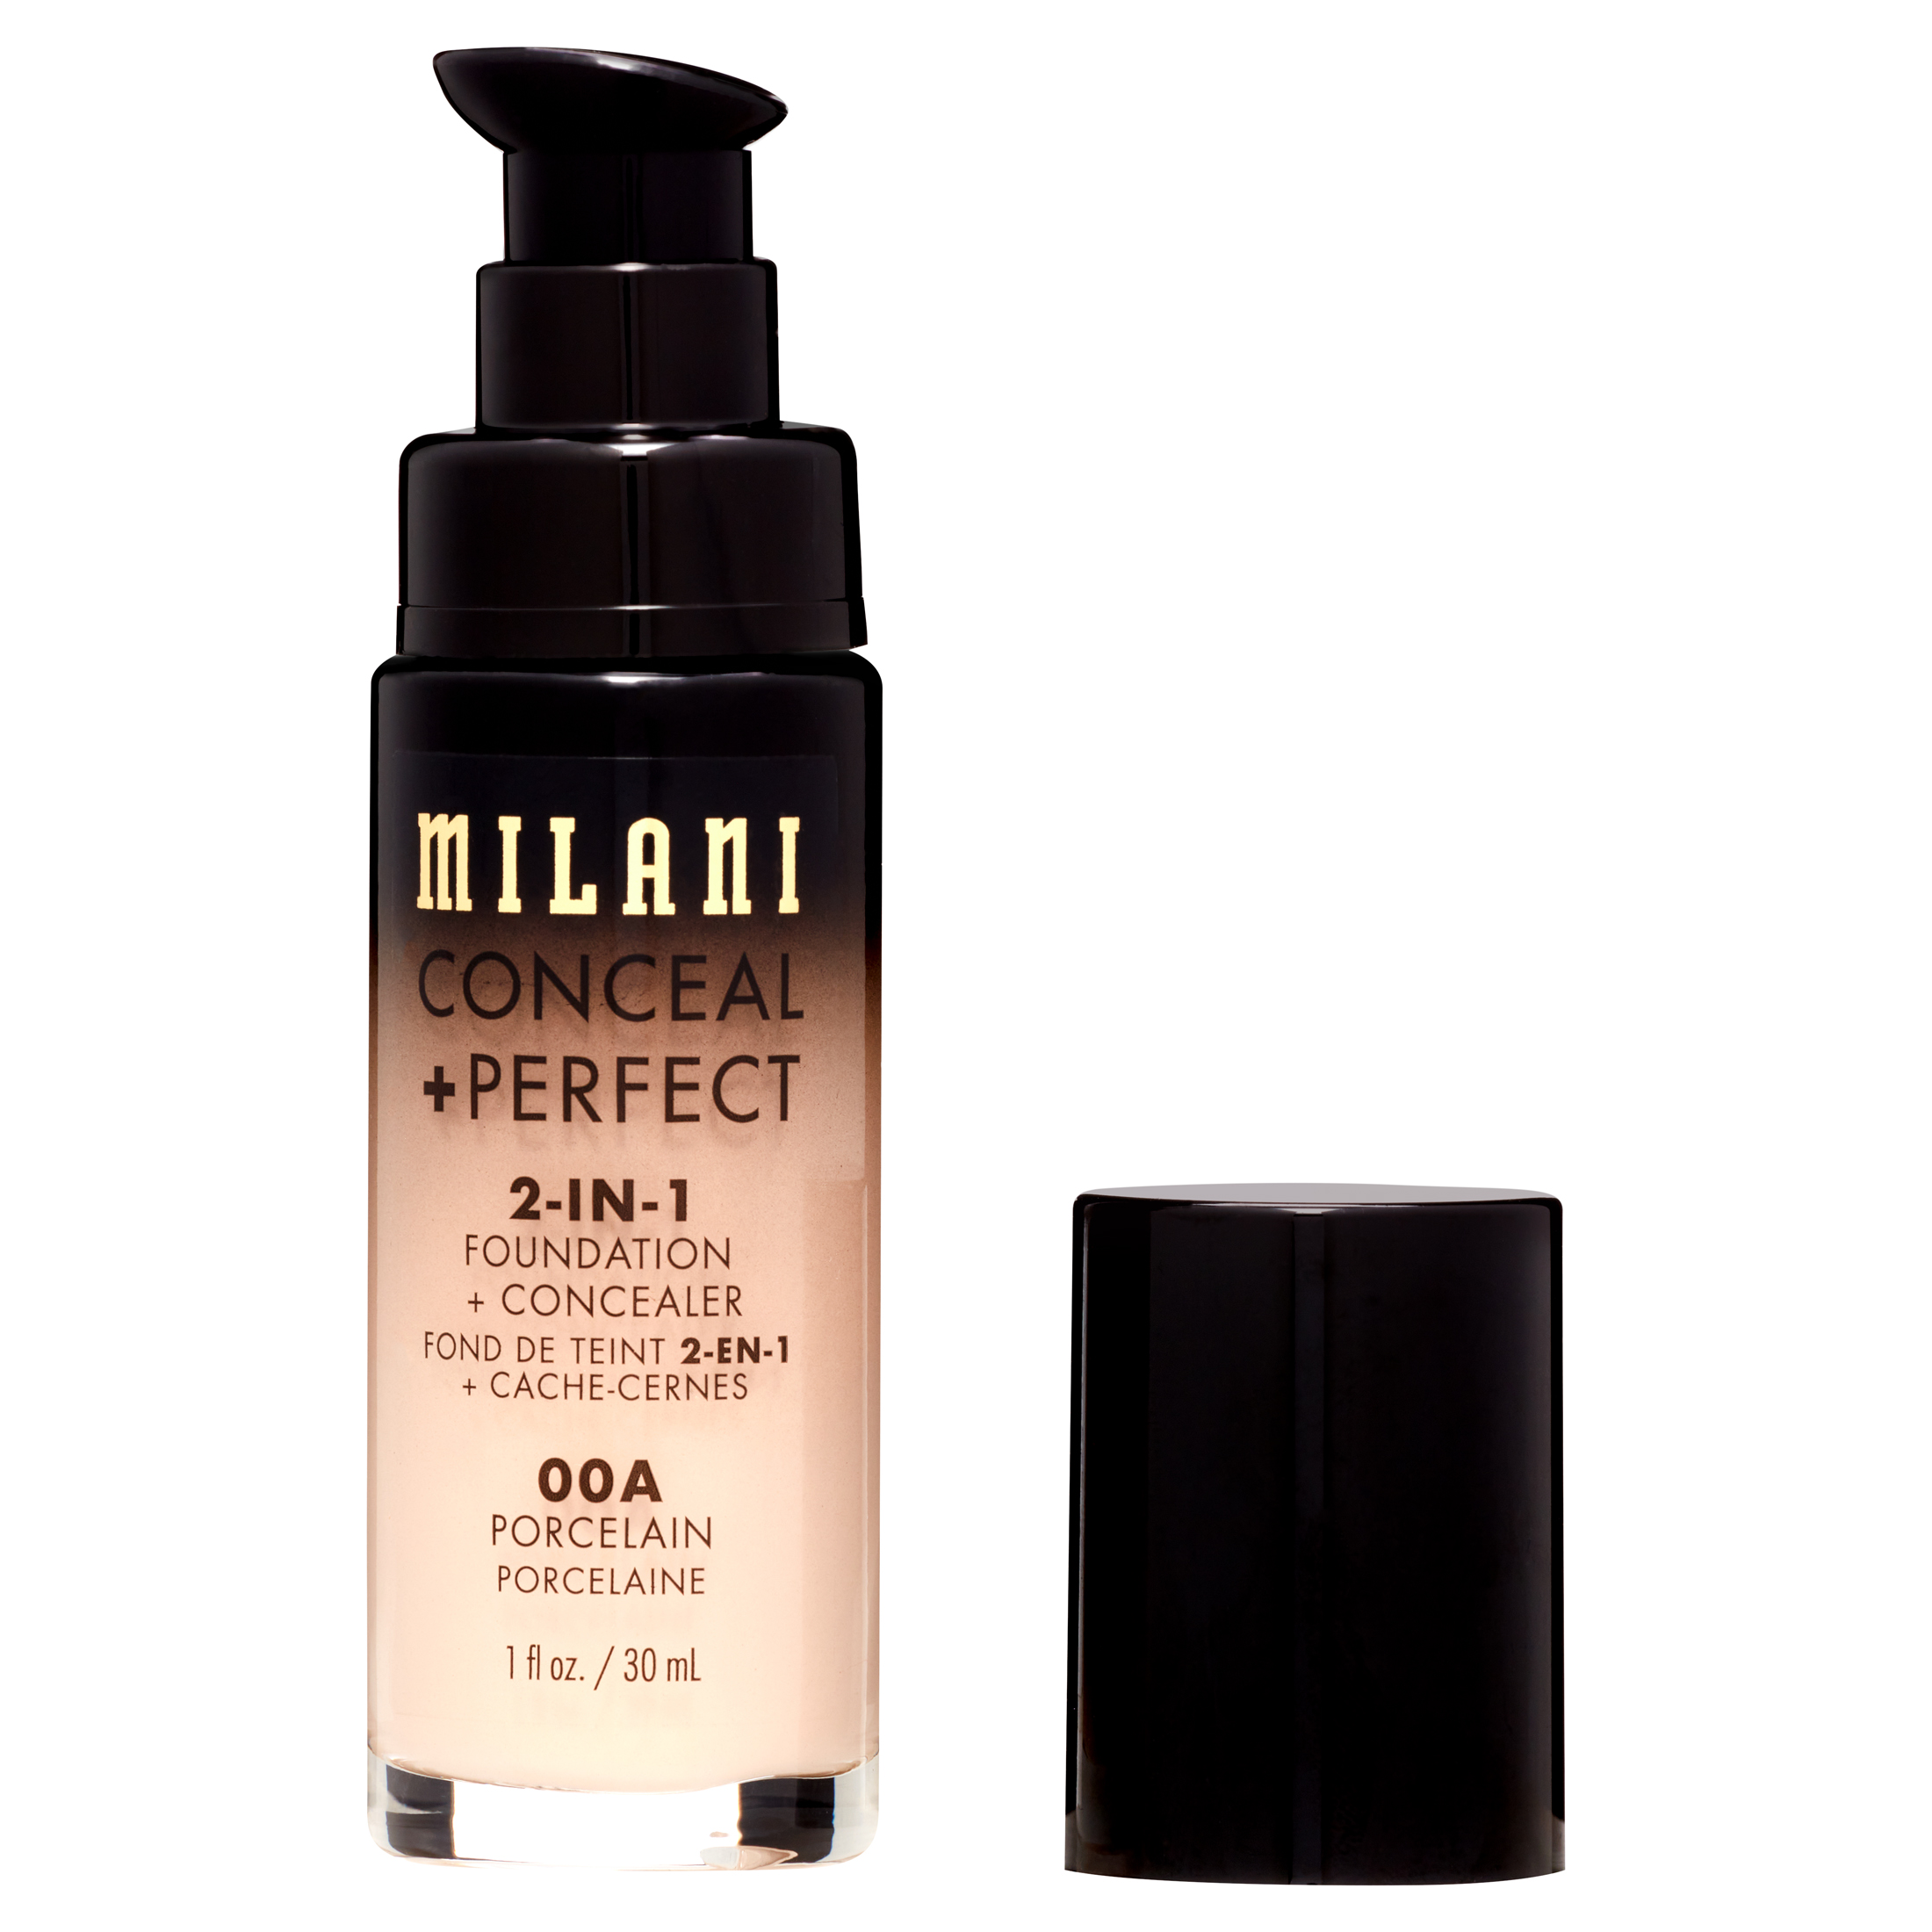 Milani Conceal + Perfect 2-in-1 Foundation + Concealer, Porcelain - image 4 of 7